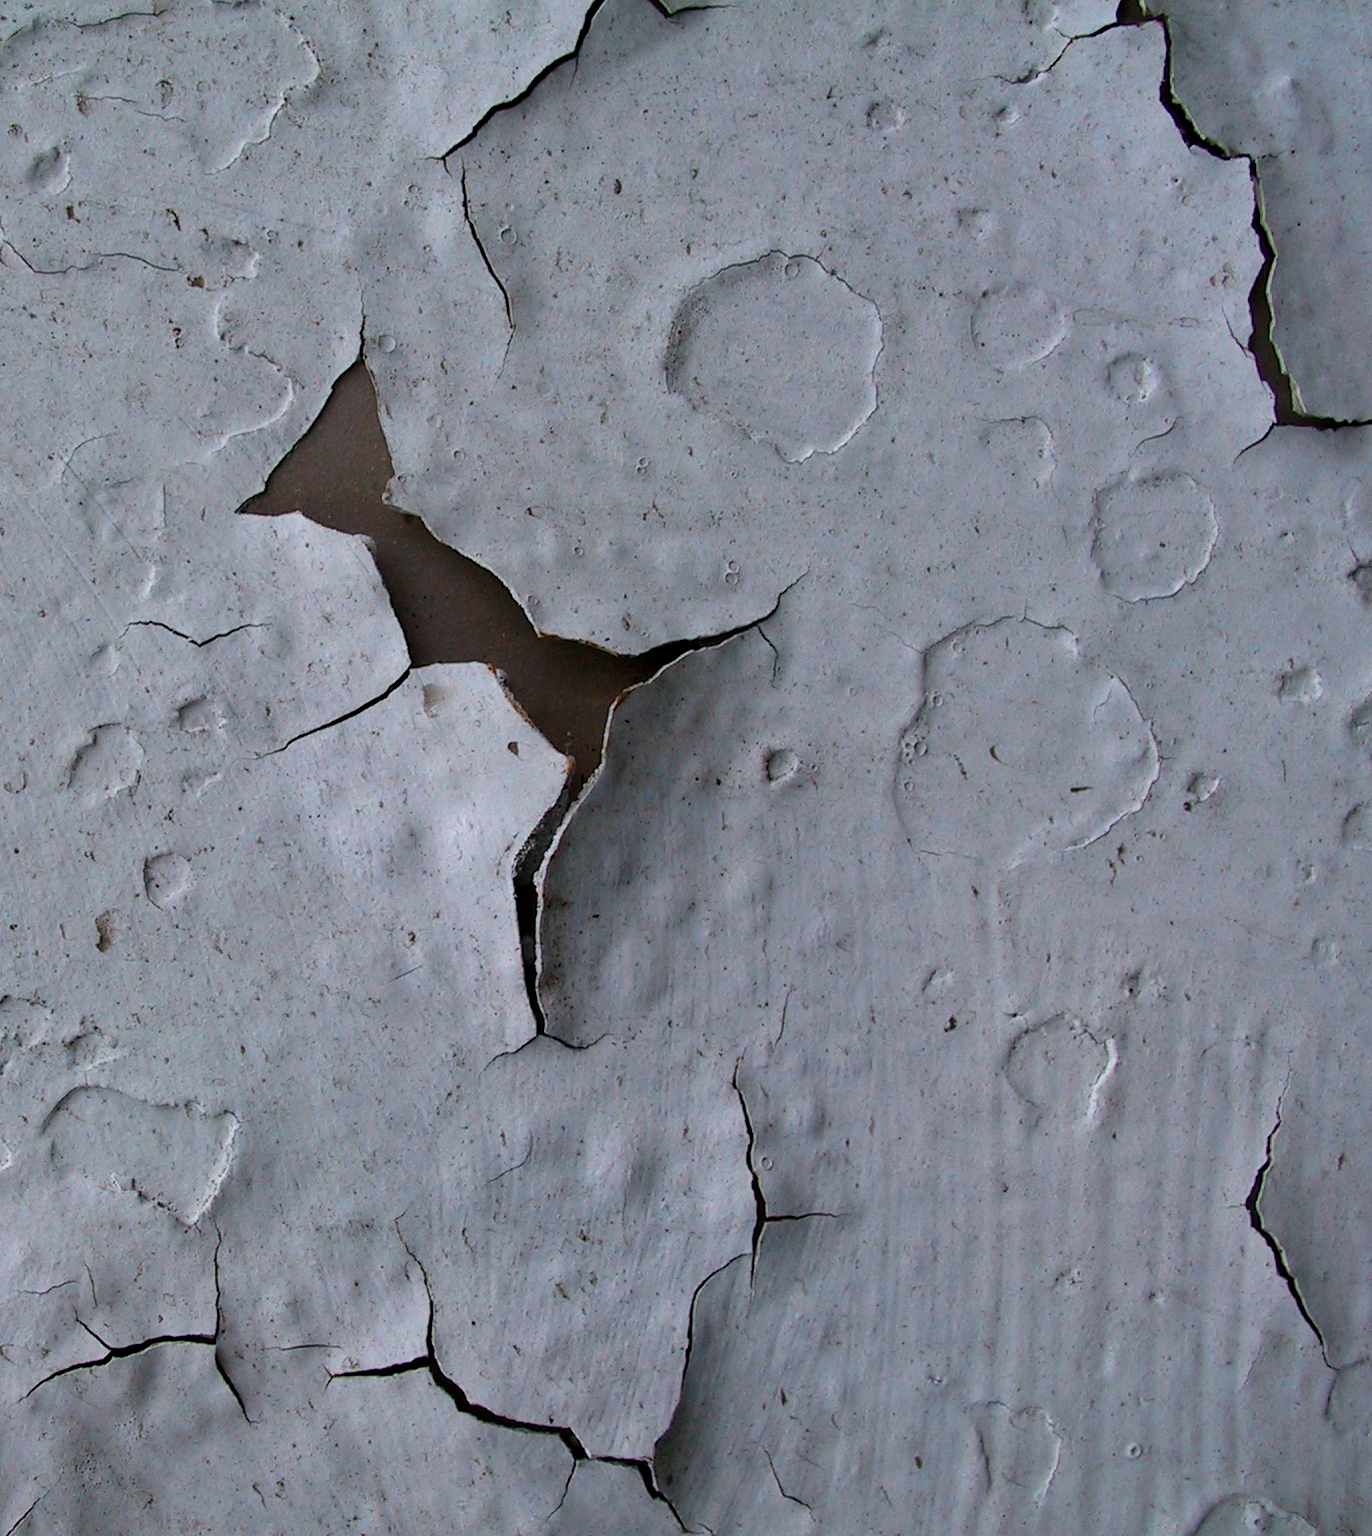 Cracked Dirty Paint 1 by Falln-Stock on DeviantArt